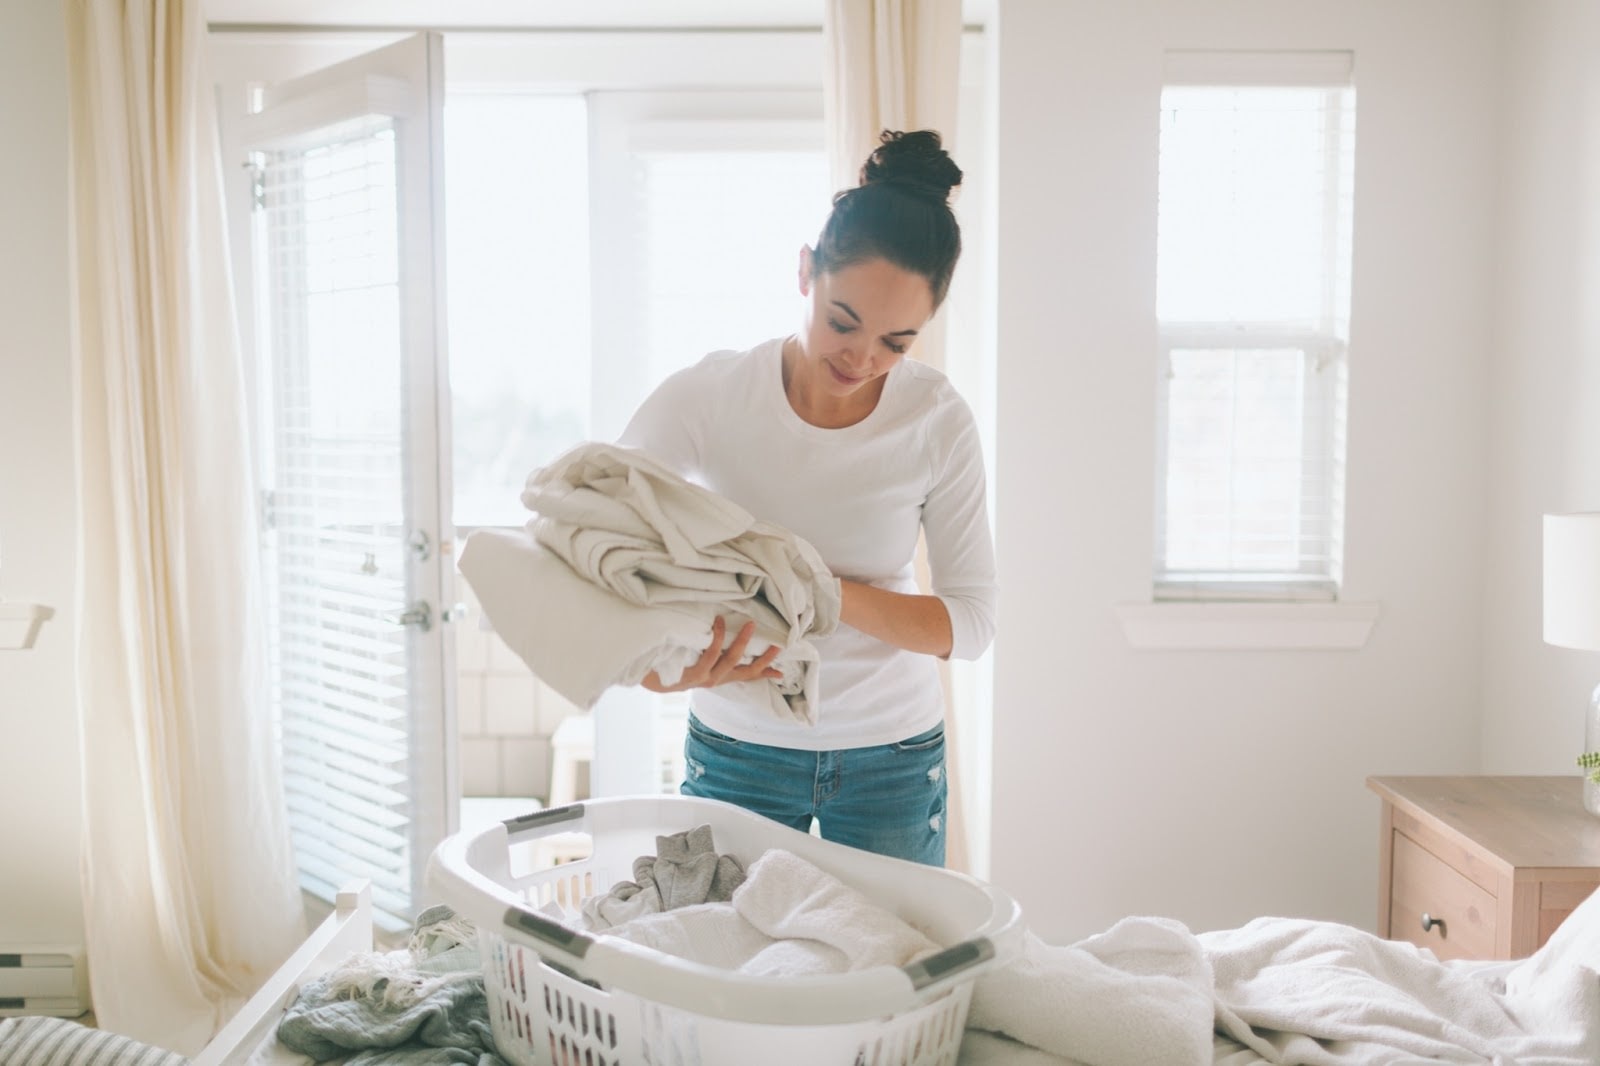 13 Essential Laundry Tips for Keeping White Clothes White